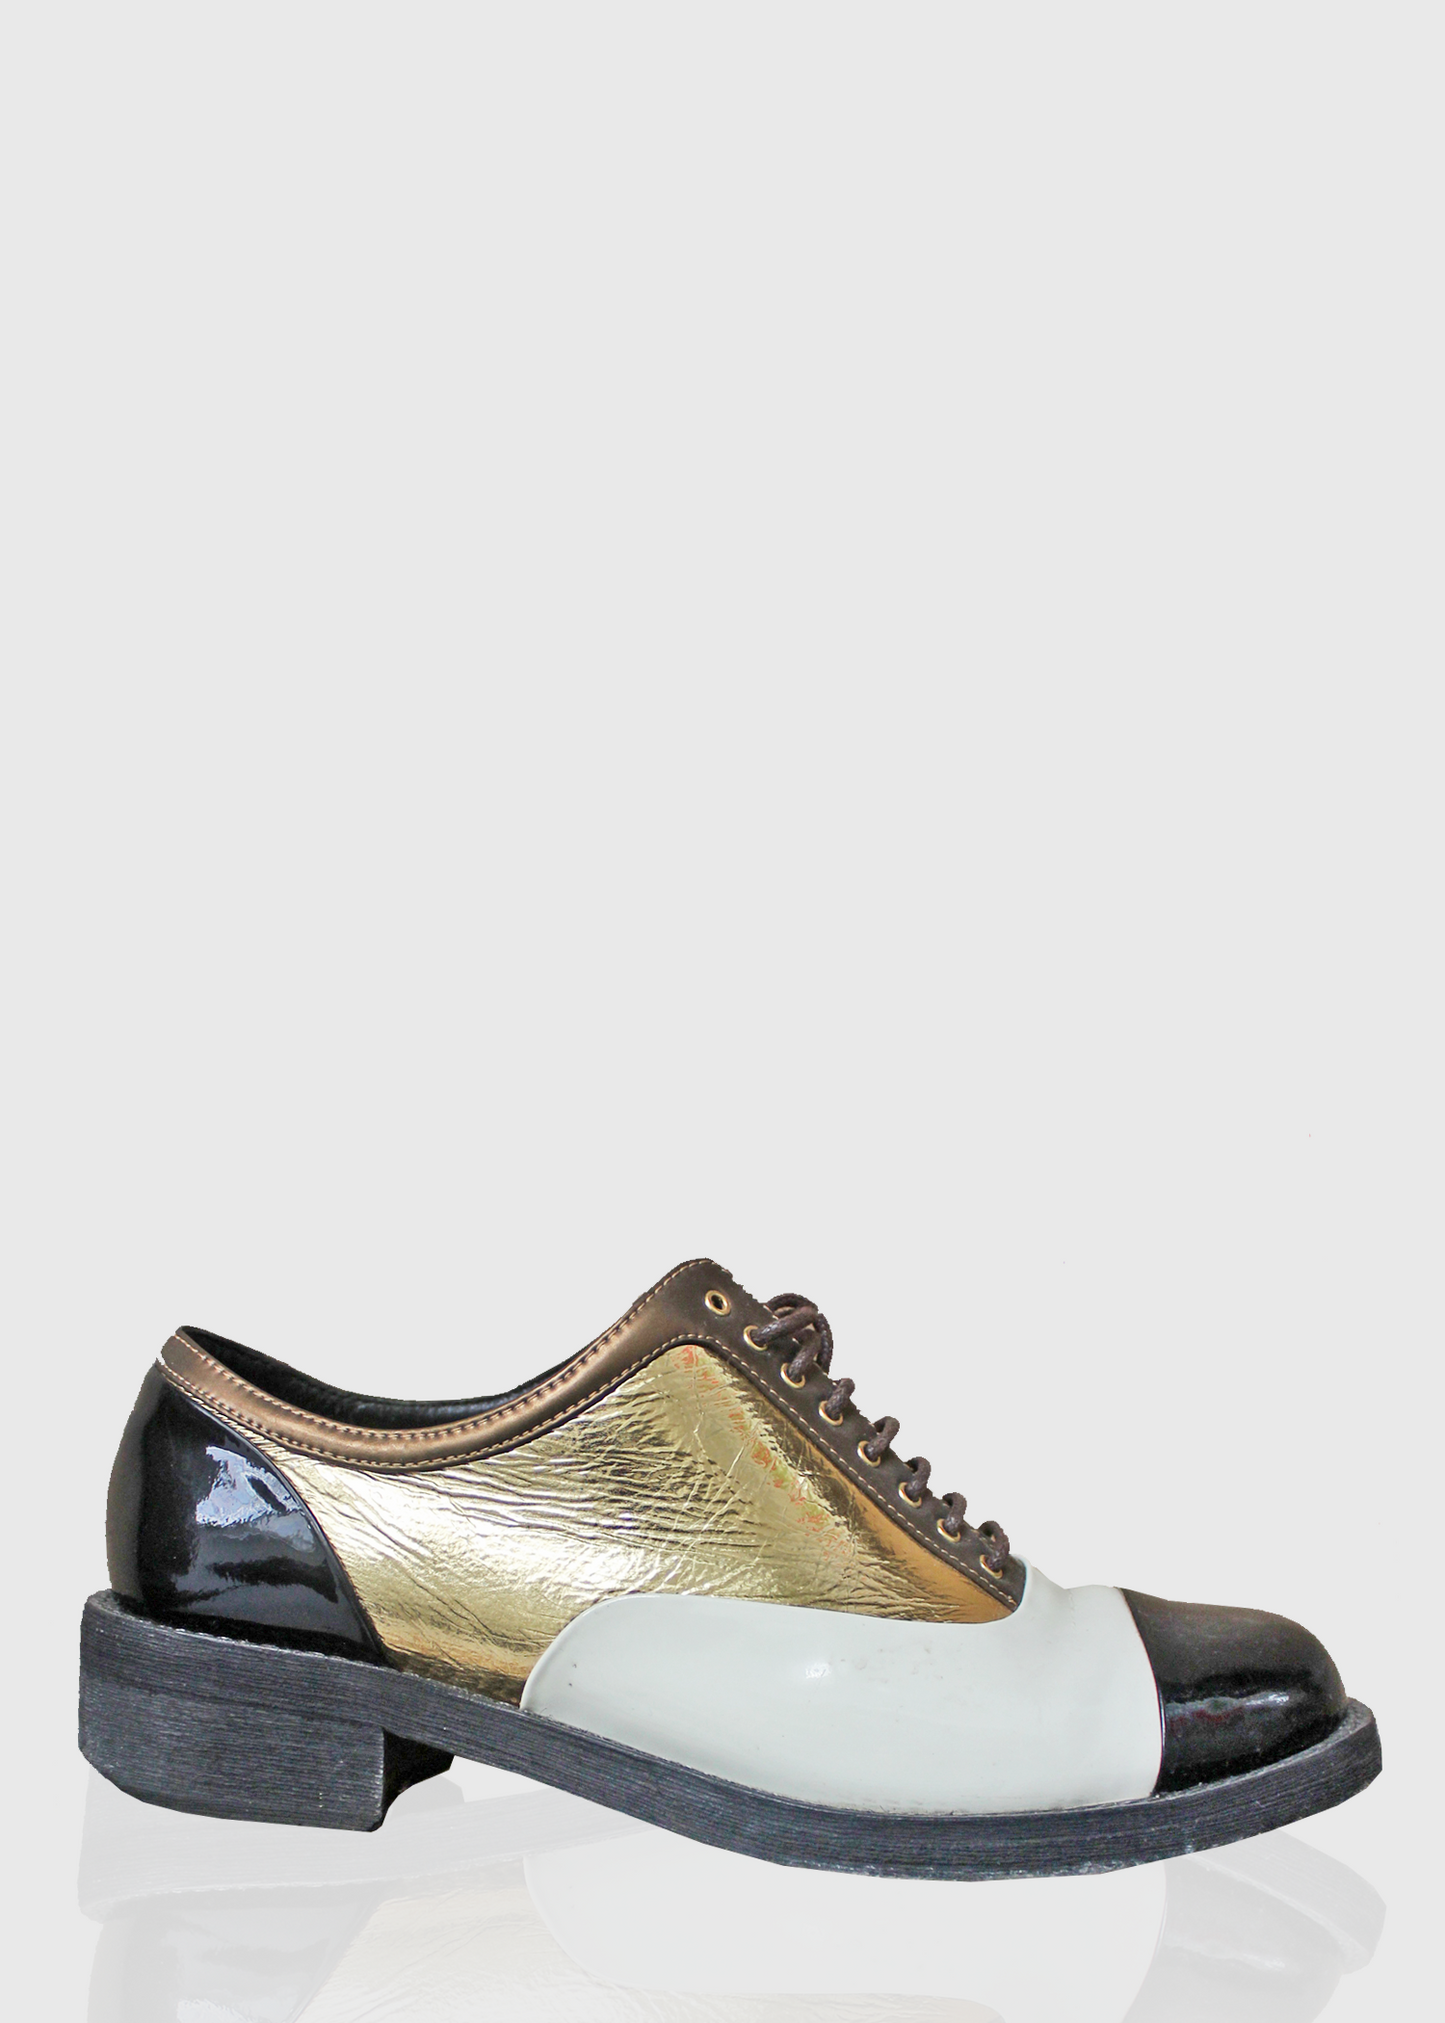 CHANEL Black and Gold Lace-Up Oxfords- Size FR39